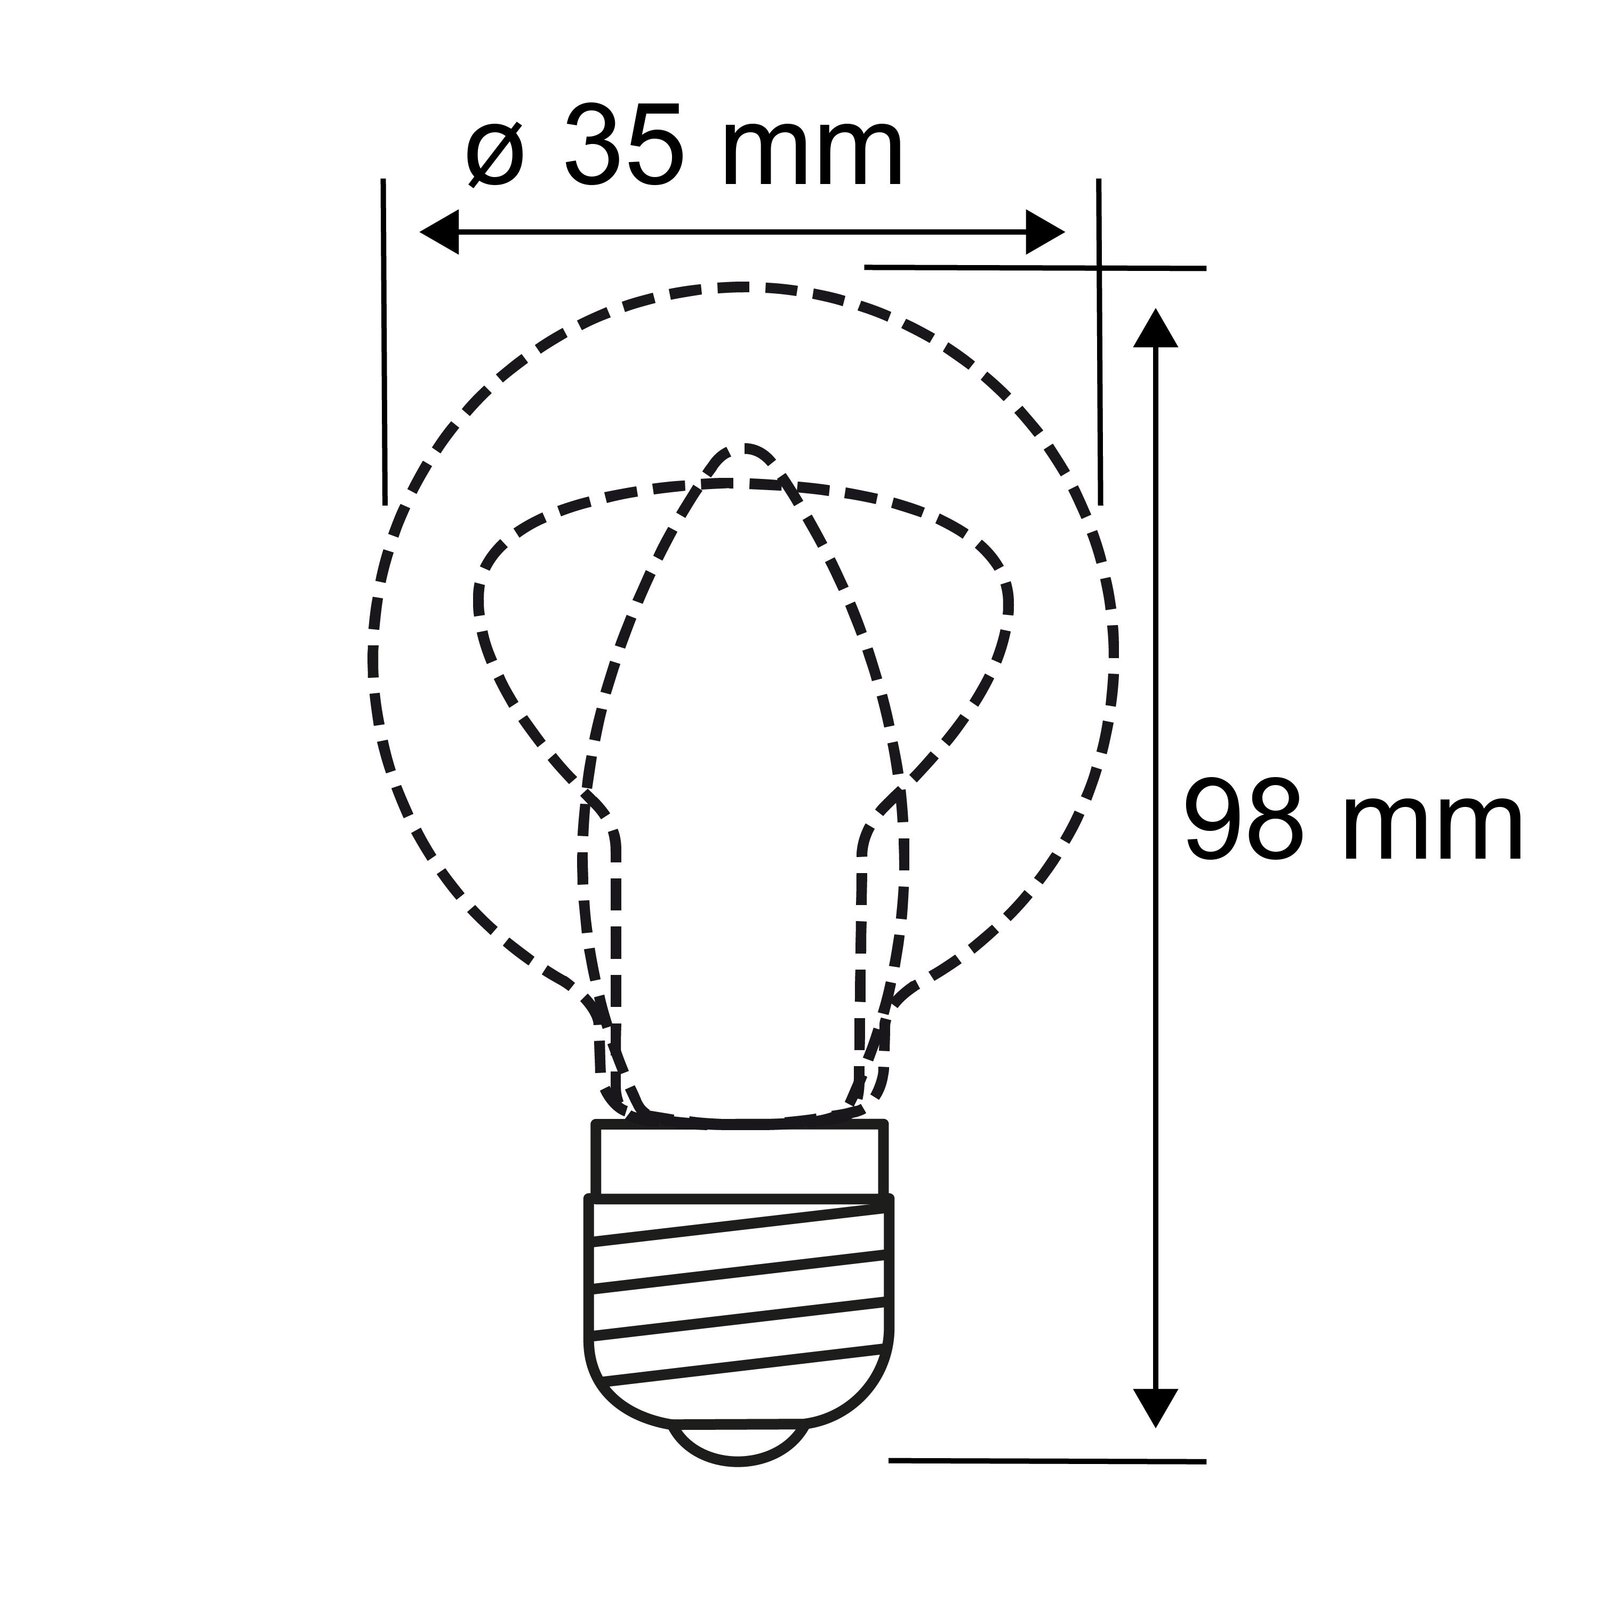 Ampoule LED E14 B35 5 W 840 mate dimmable